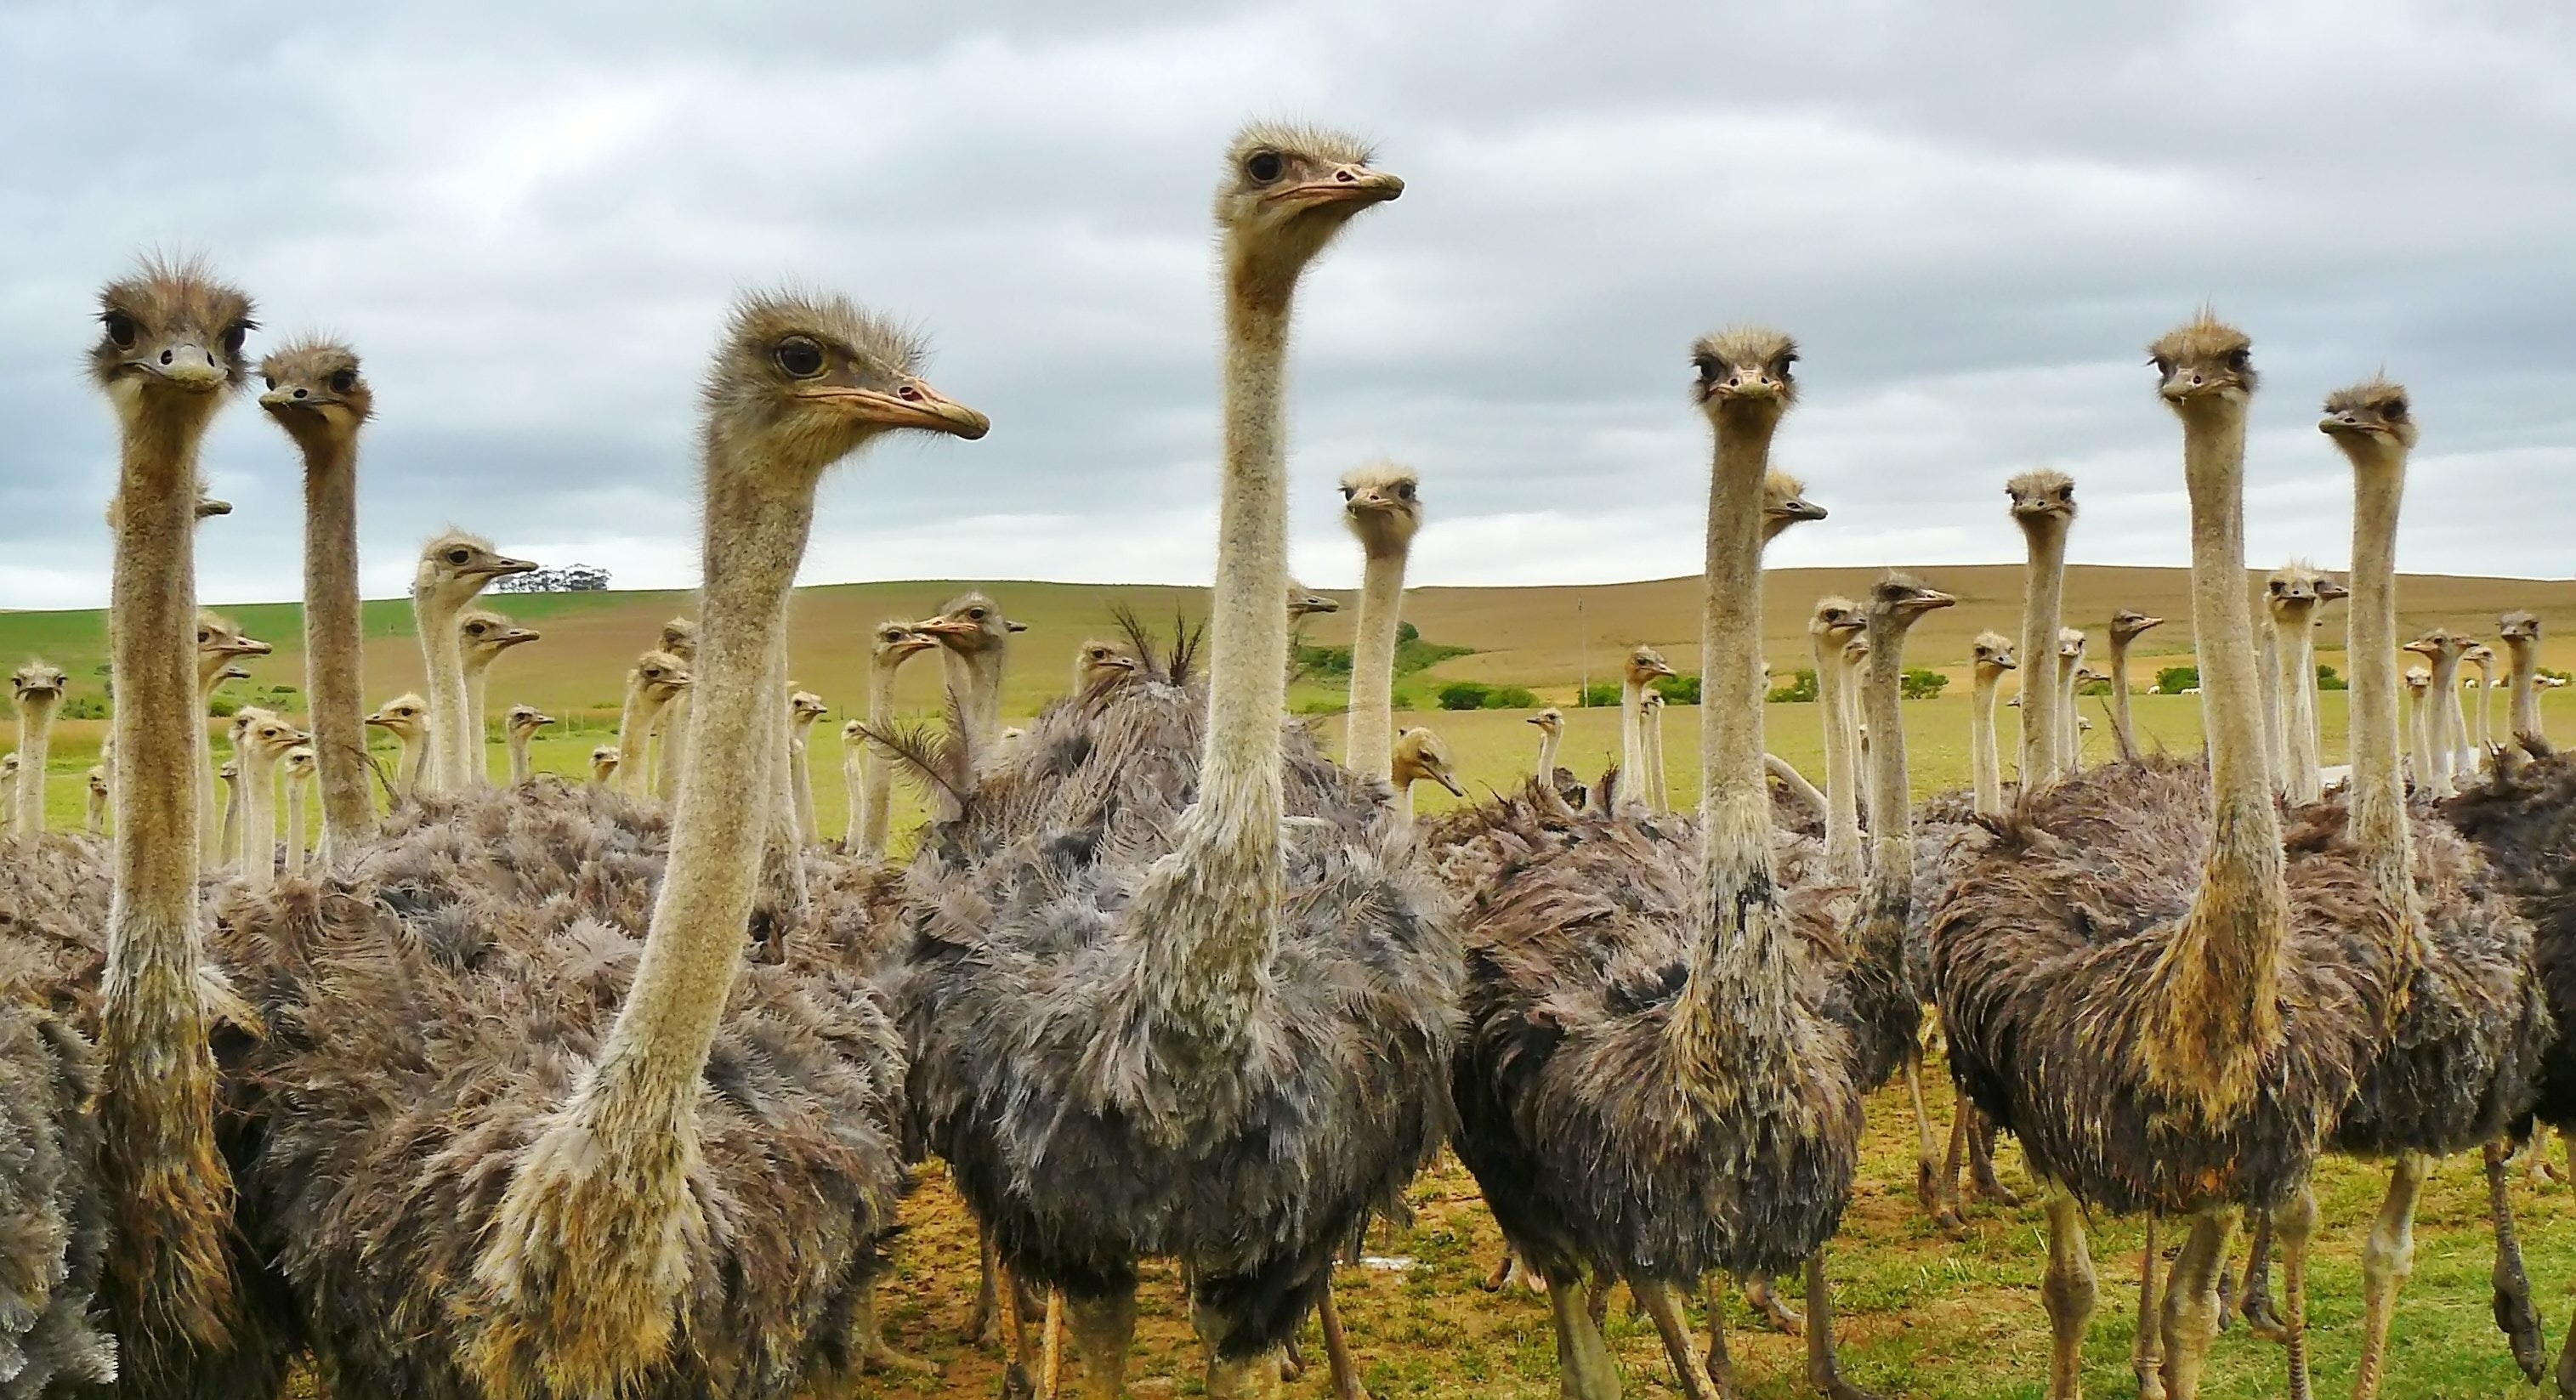 A herd of ostriches spotted while on a safari